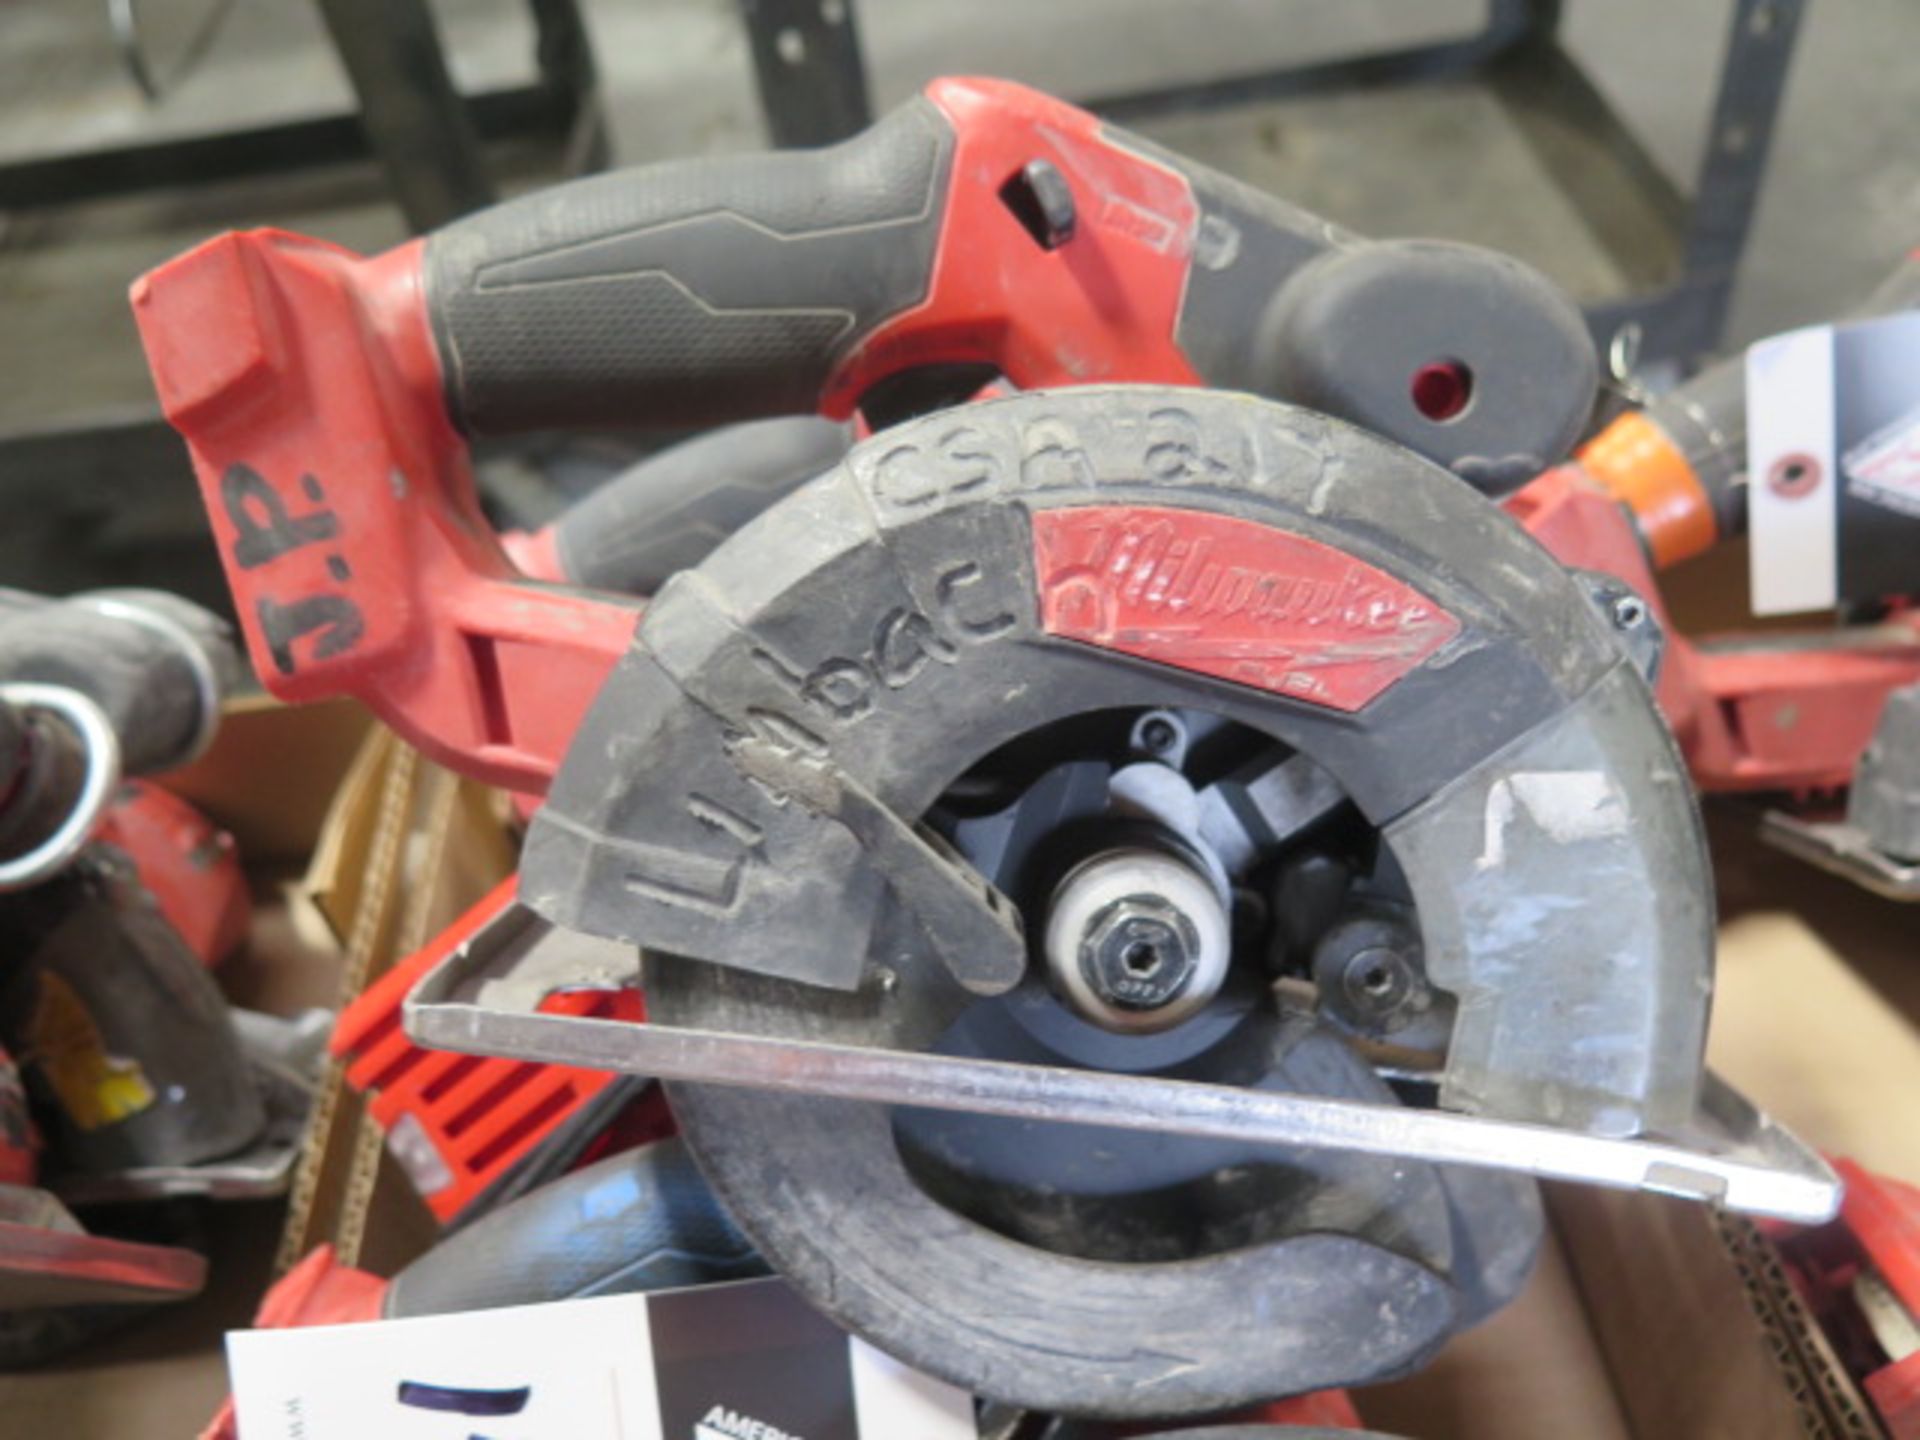 Milwaukee 18 Volt Circular Saws (3) (SOLD AS-IS - NO WARRANTY) - Image 7 of 7